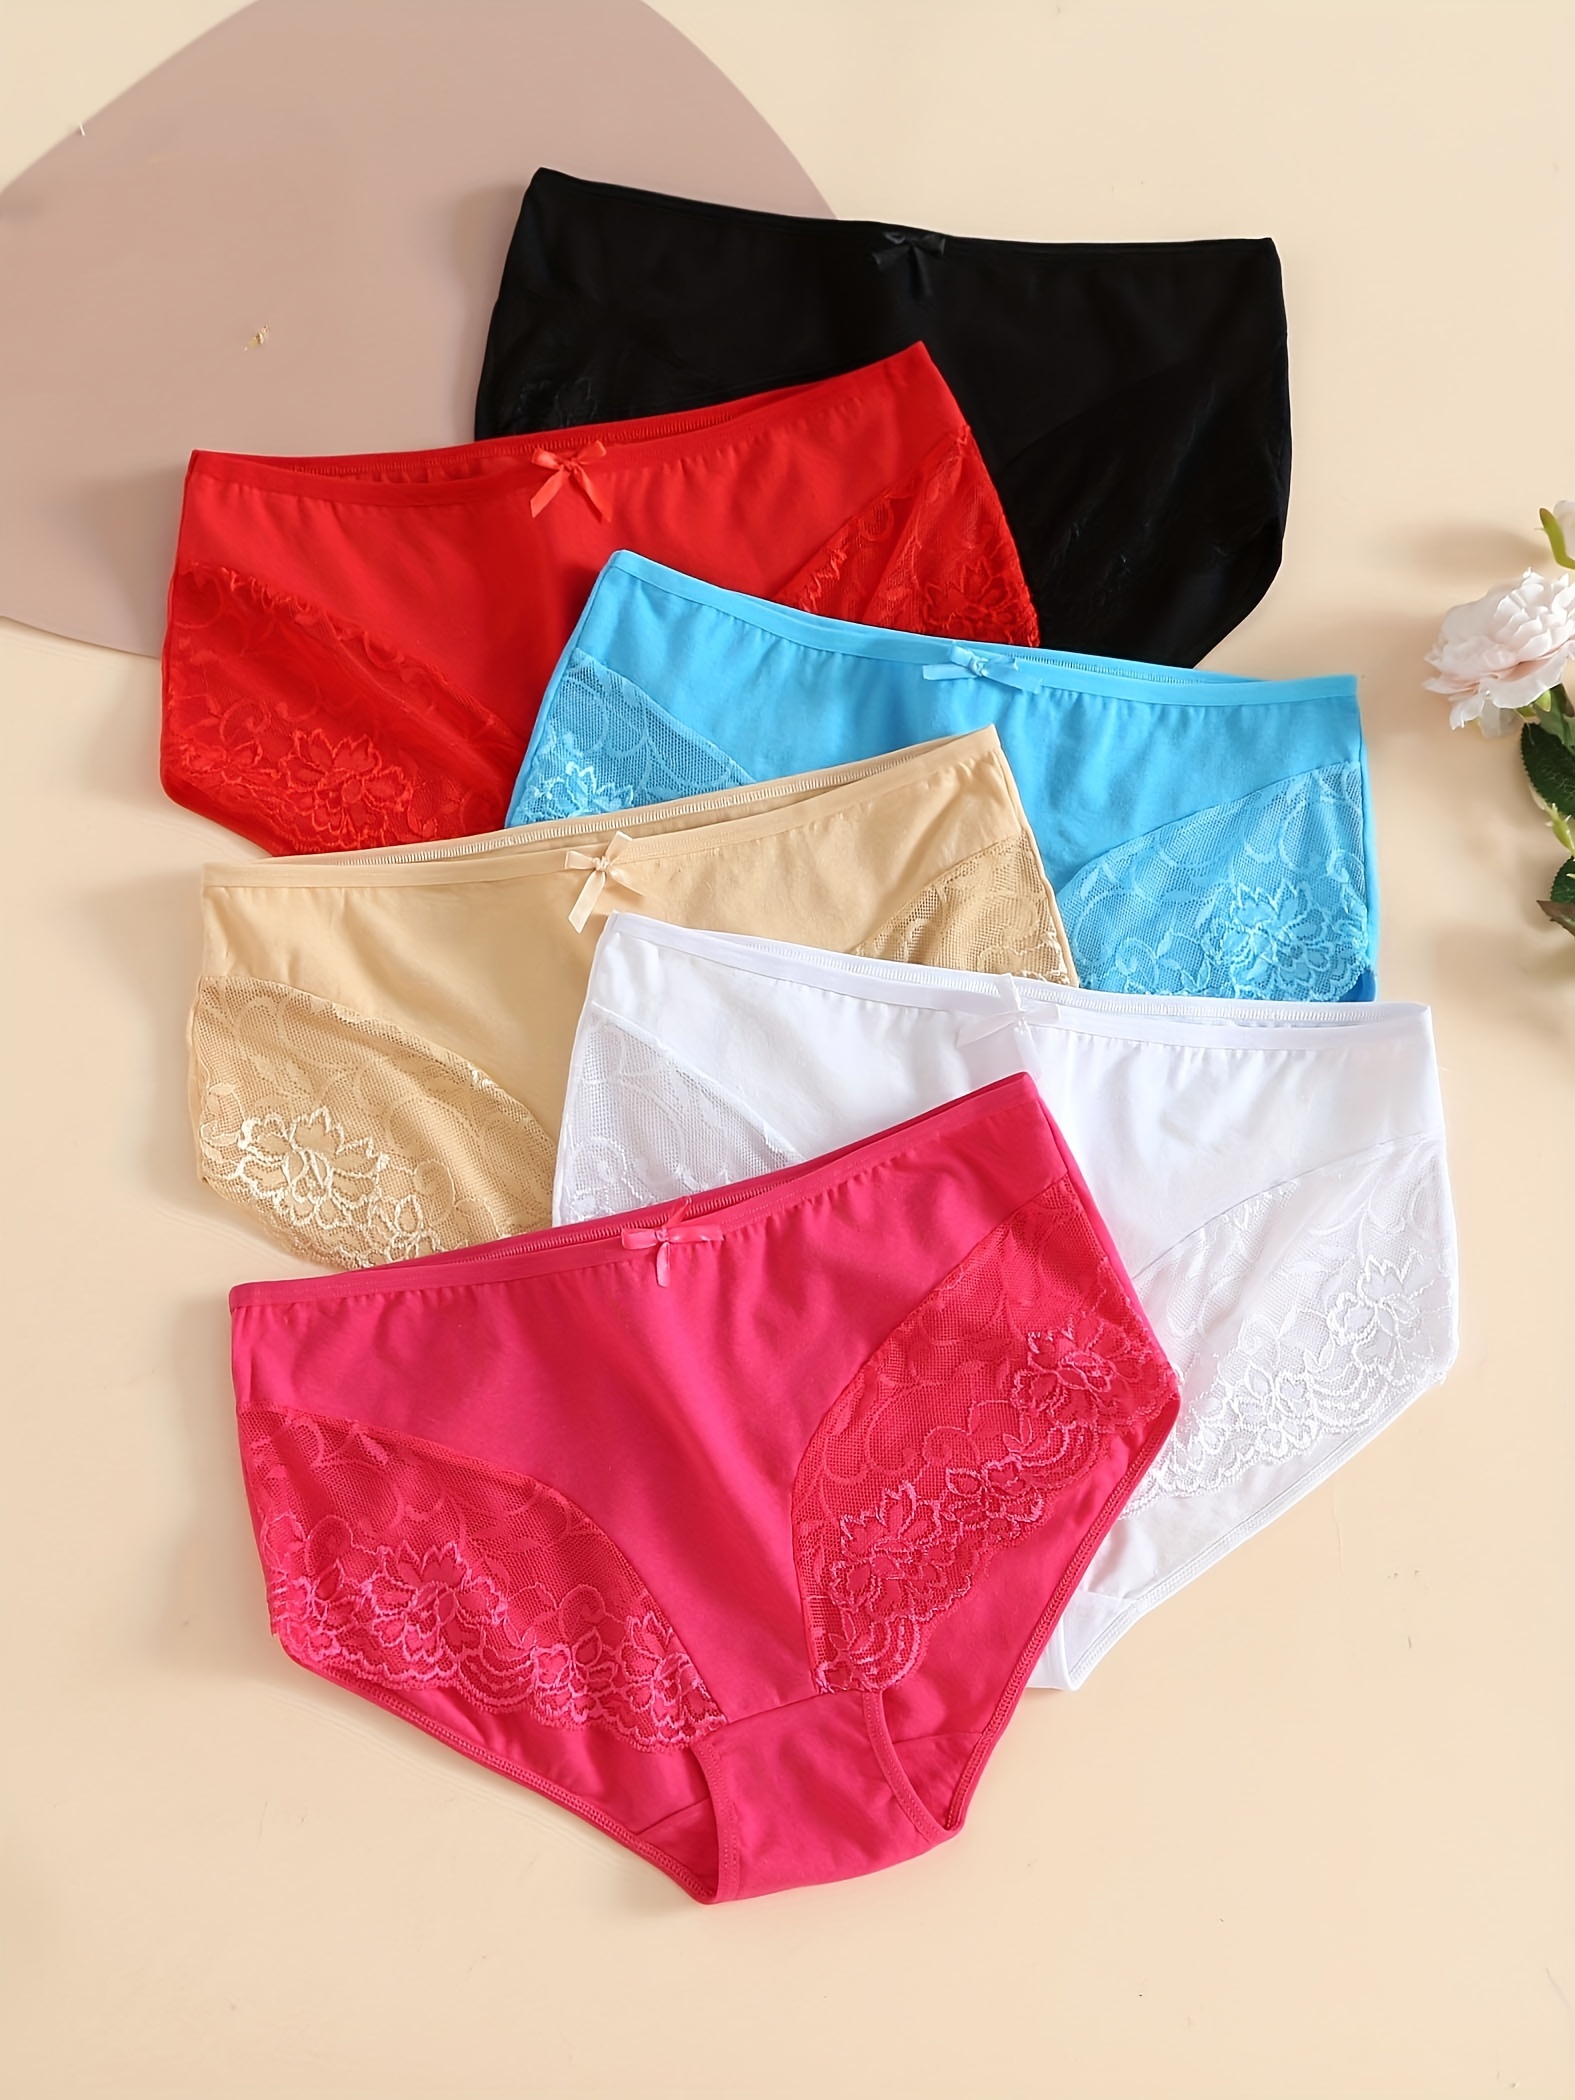 Buy Girl Women's High Waist Stretch Comfortable Cotton Lace